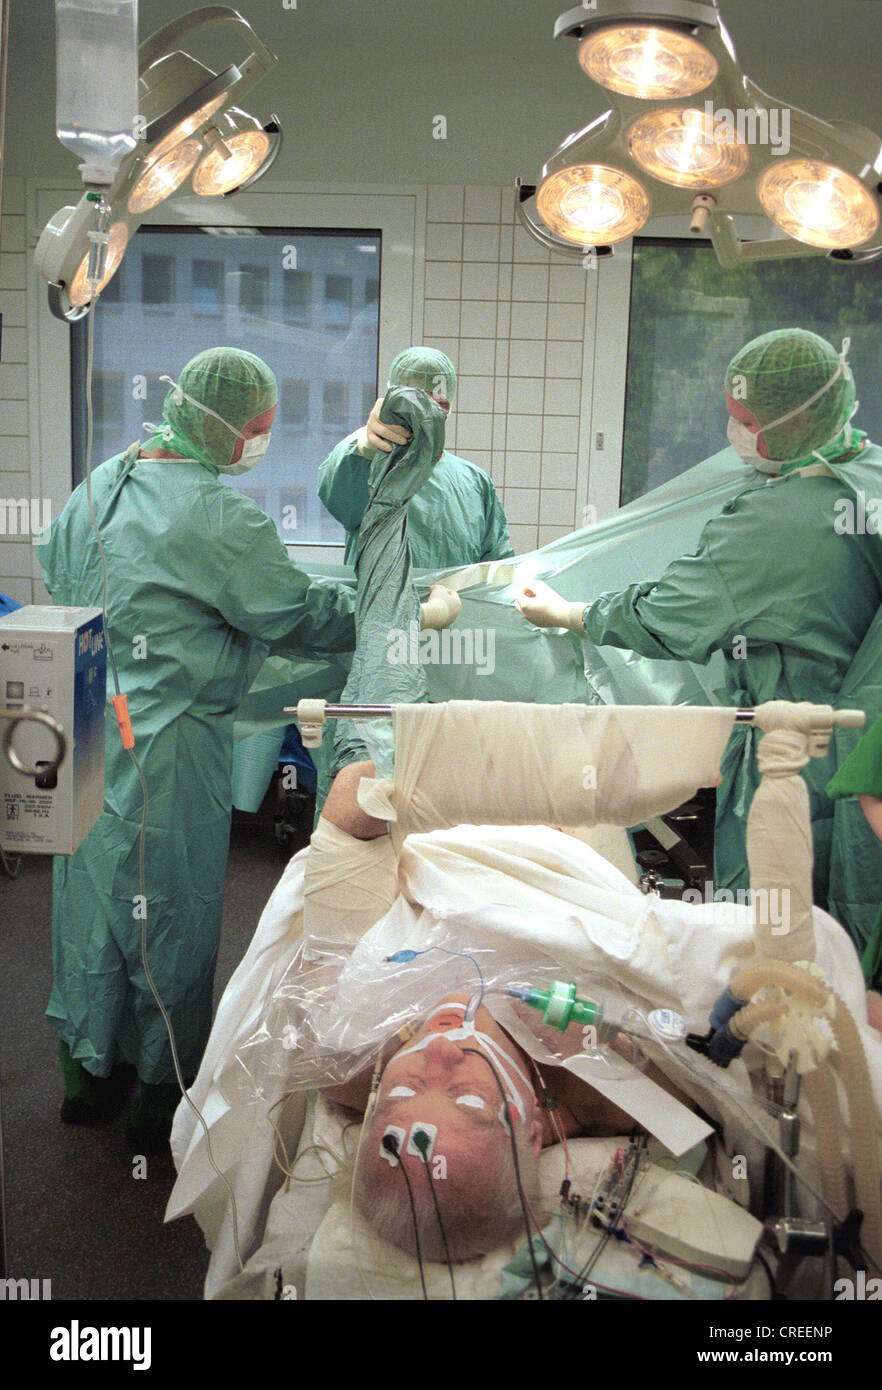 Surgeons in the operating room, Bochum, Germany Stock Photo